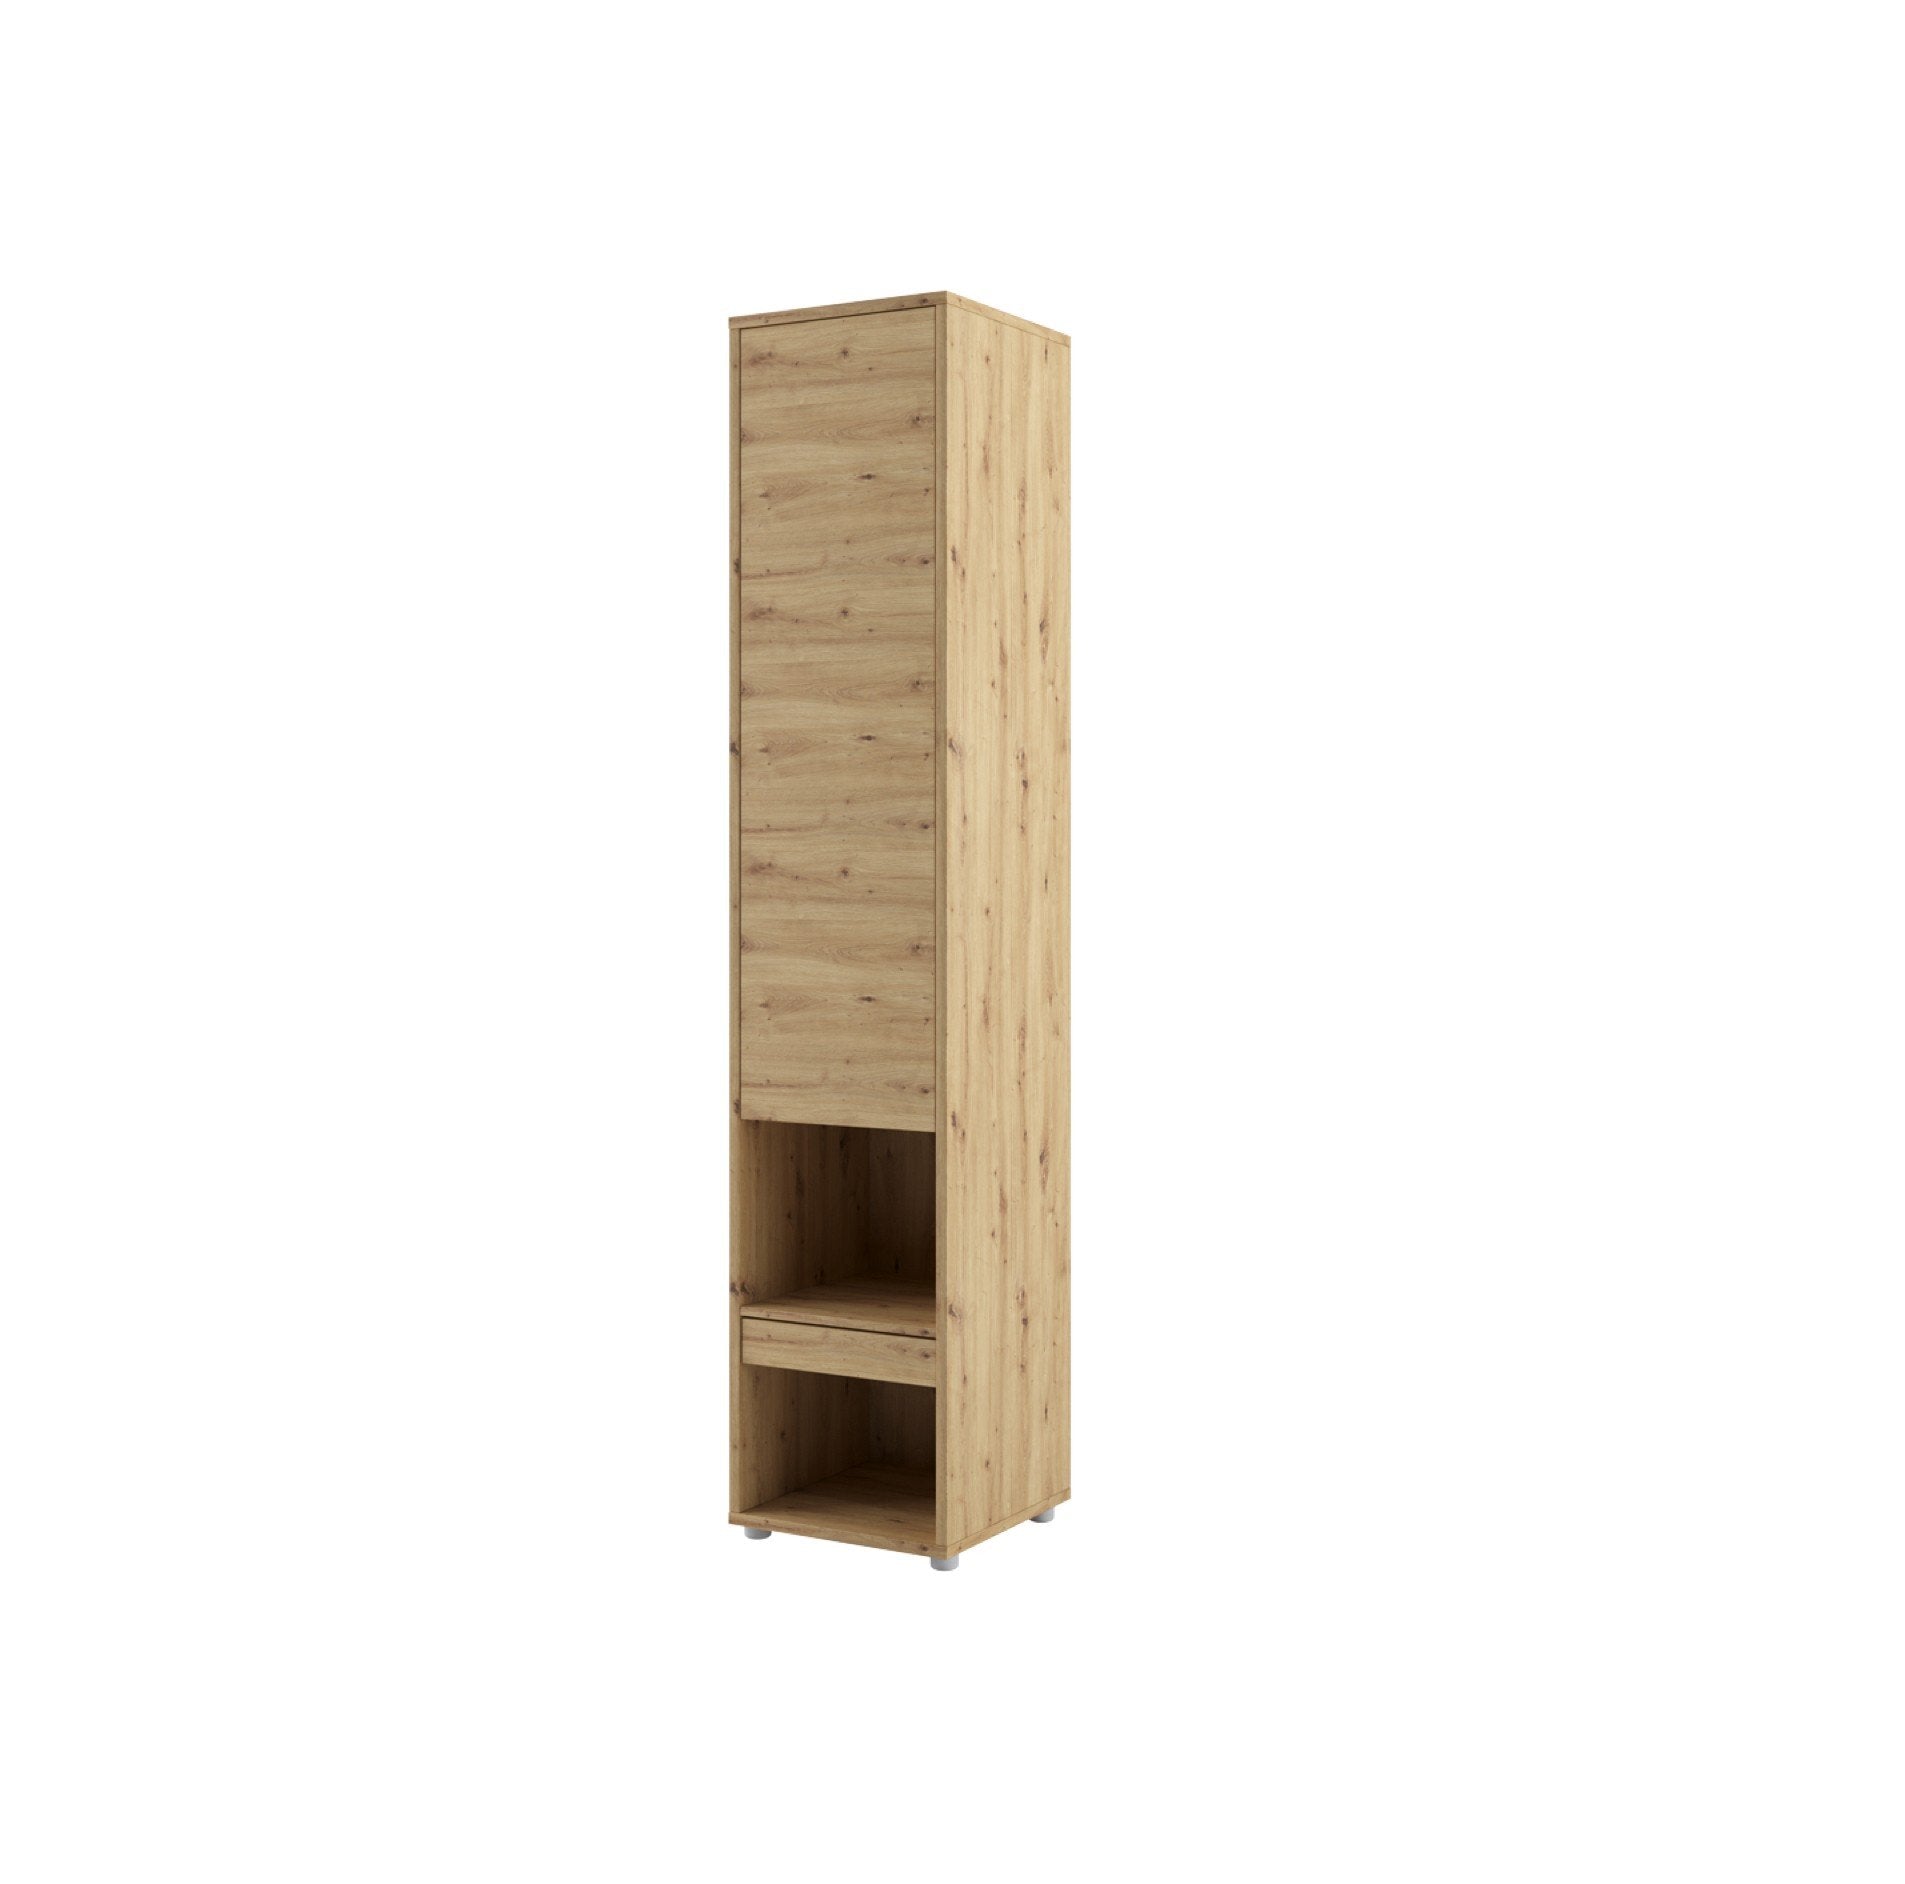 View BC07 Tall Storage Cabinet for Vertical Wall Bed Concept Murphy Bed Oak Artisan 45cm information